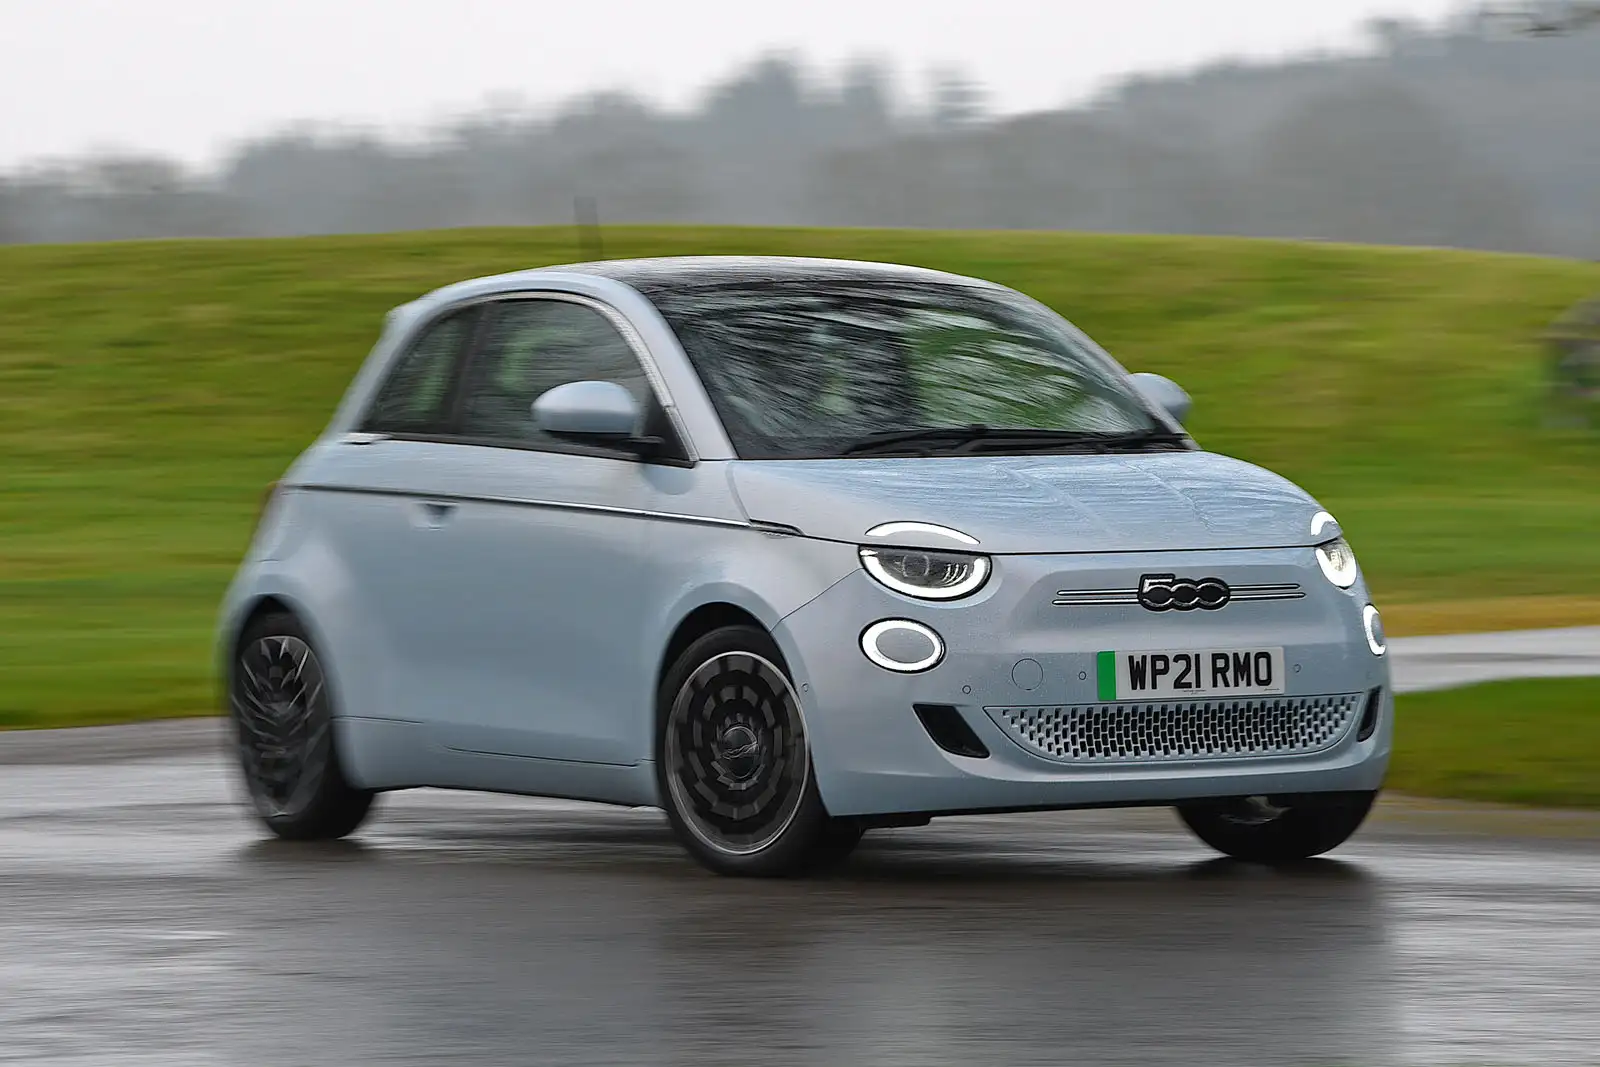 Fiat Expects High Interest in New Hybrid 500e Small Car